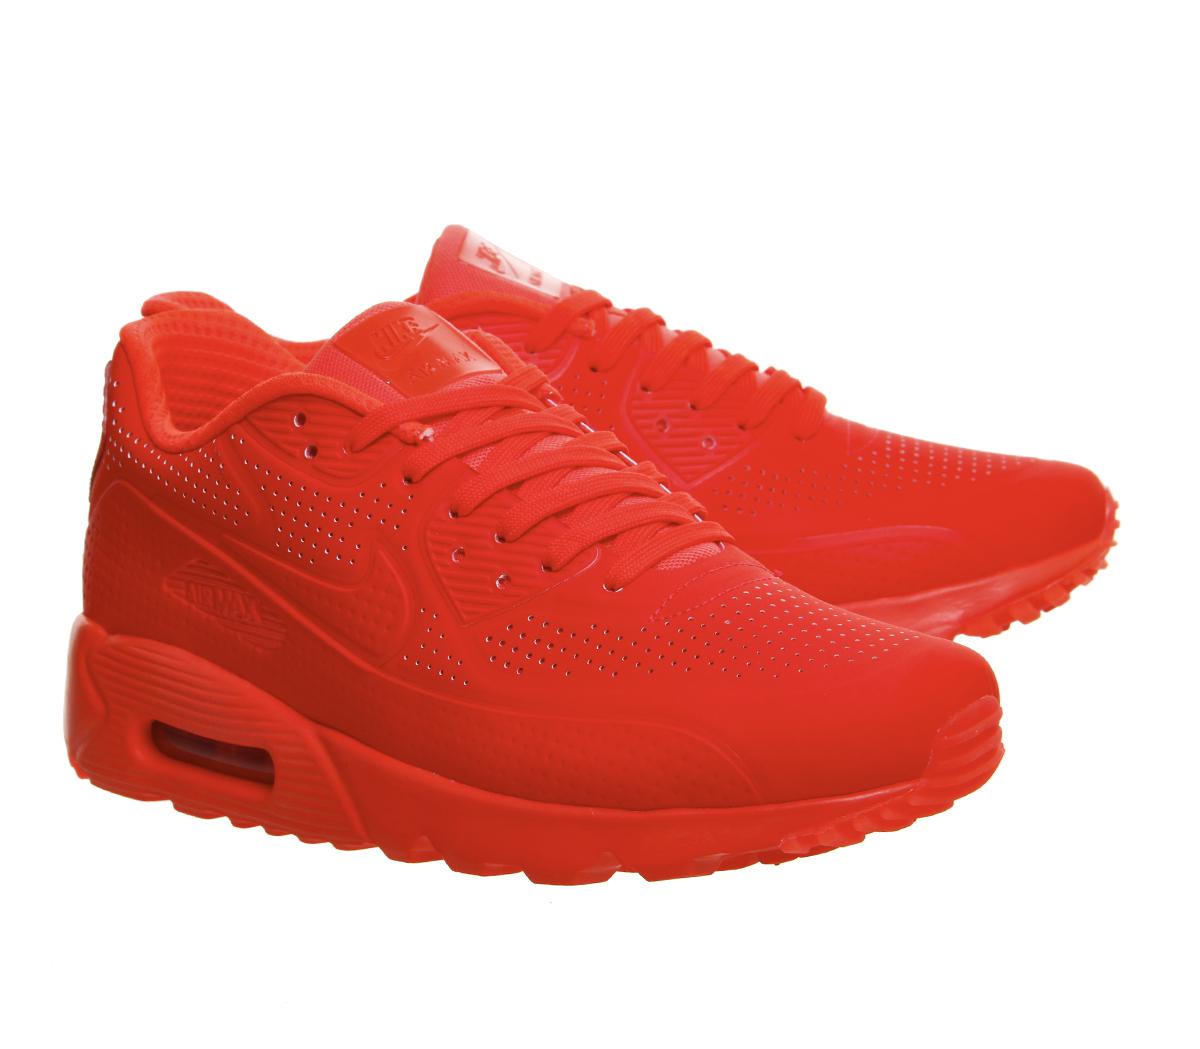 air max 90 ultra moire red